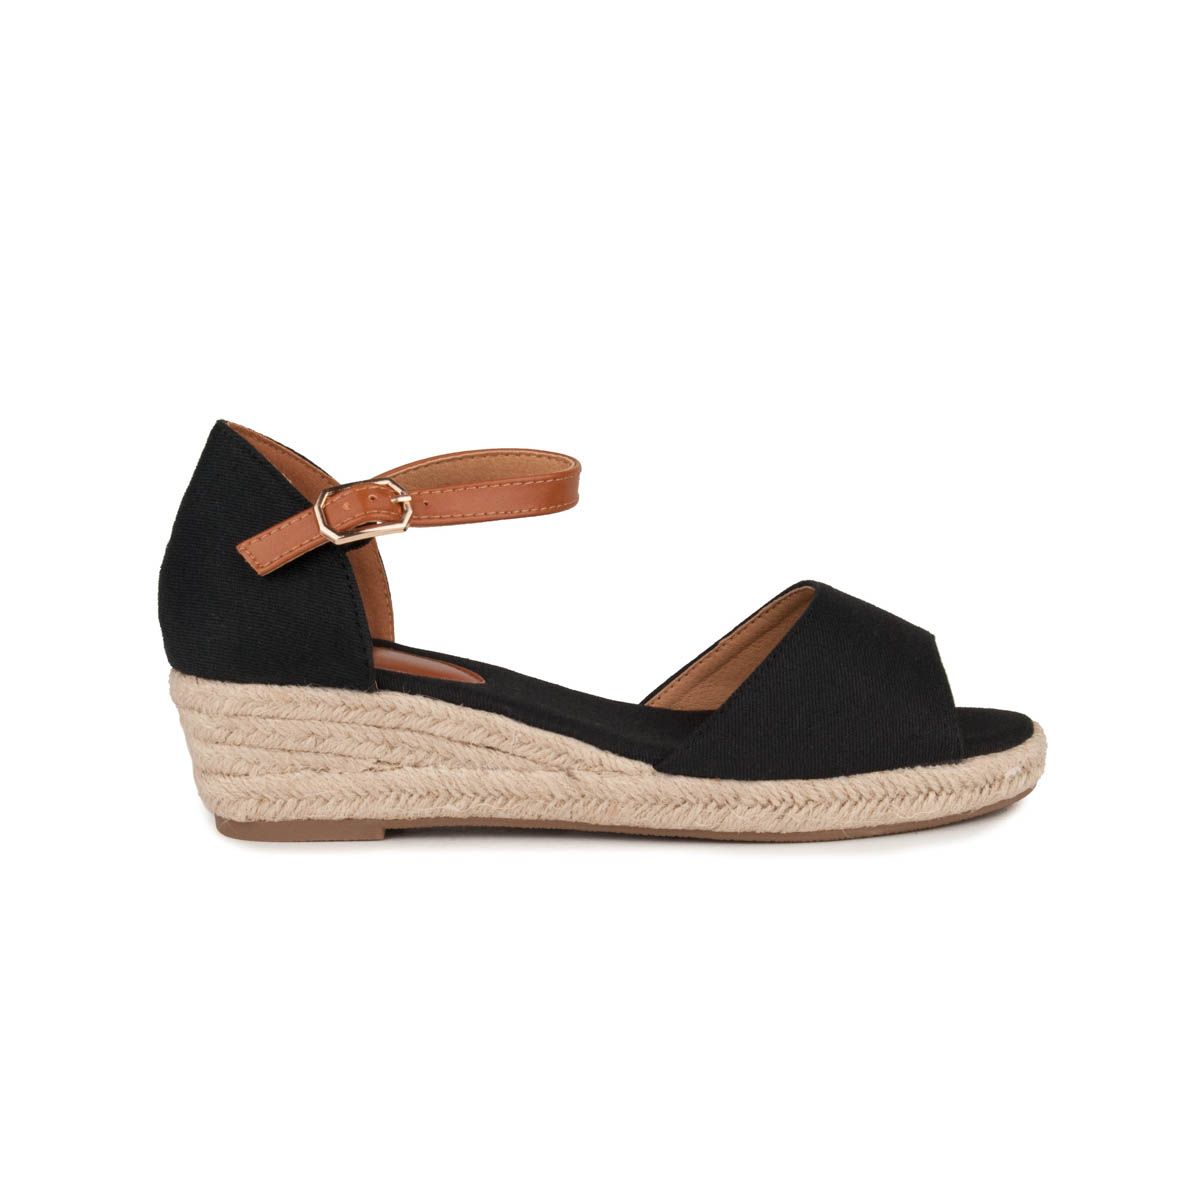 The esparto is fashionable and can not miss some espadrilles this season in your closet. Manufactured in natural materials with spotto floor and anti-slip rubber patin. The closure is with buckle and elastic to adjust perfectly. The buttress is reinforced and the tone of the sandal. The height of the wedge is 4.5 cm.